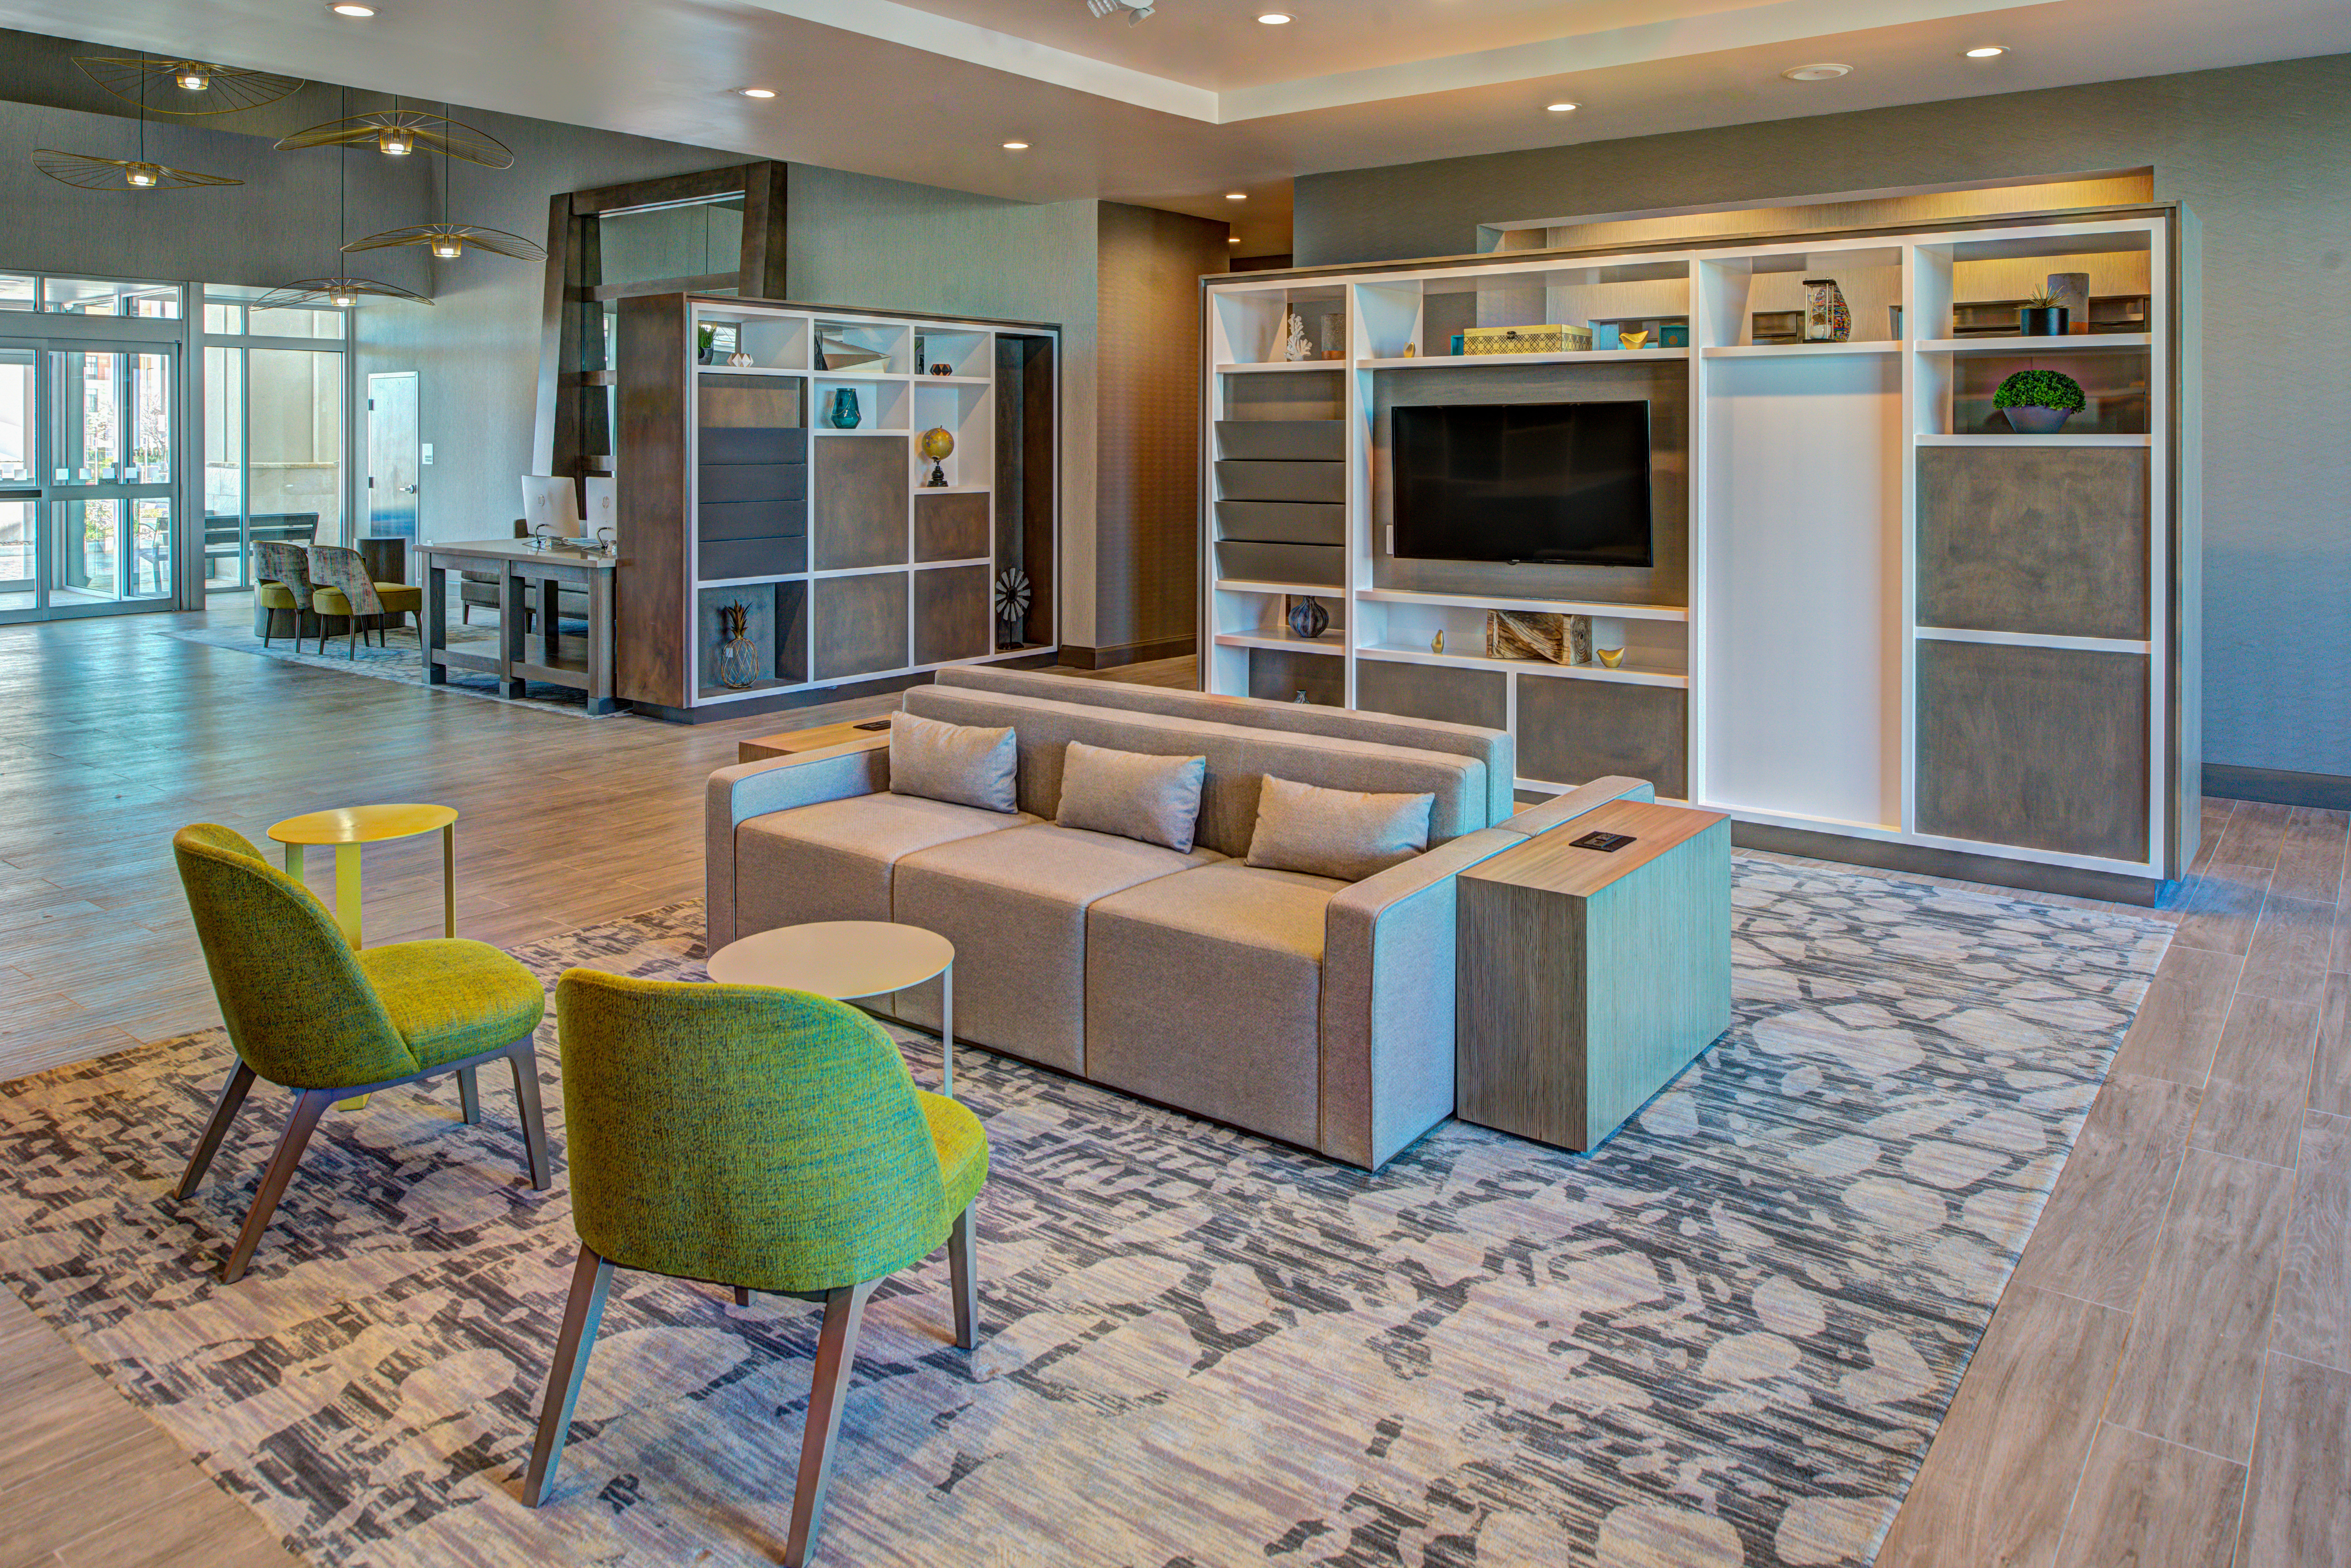 Join family, friends, or coworkers in our modern Media Lounge